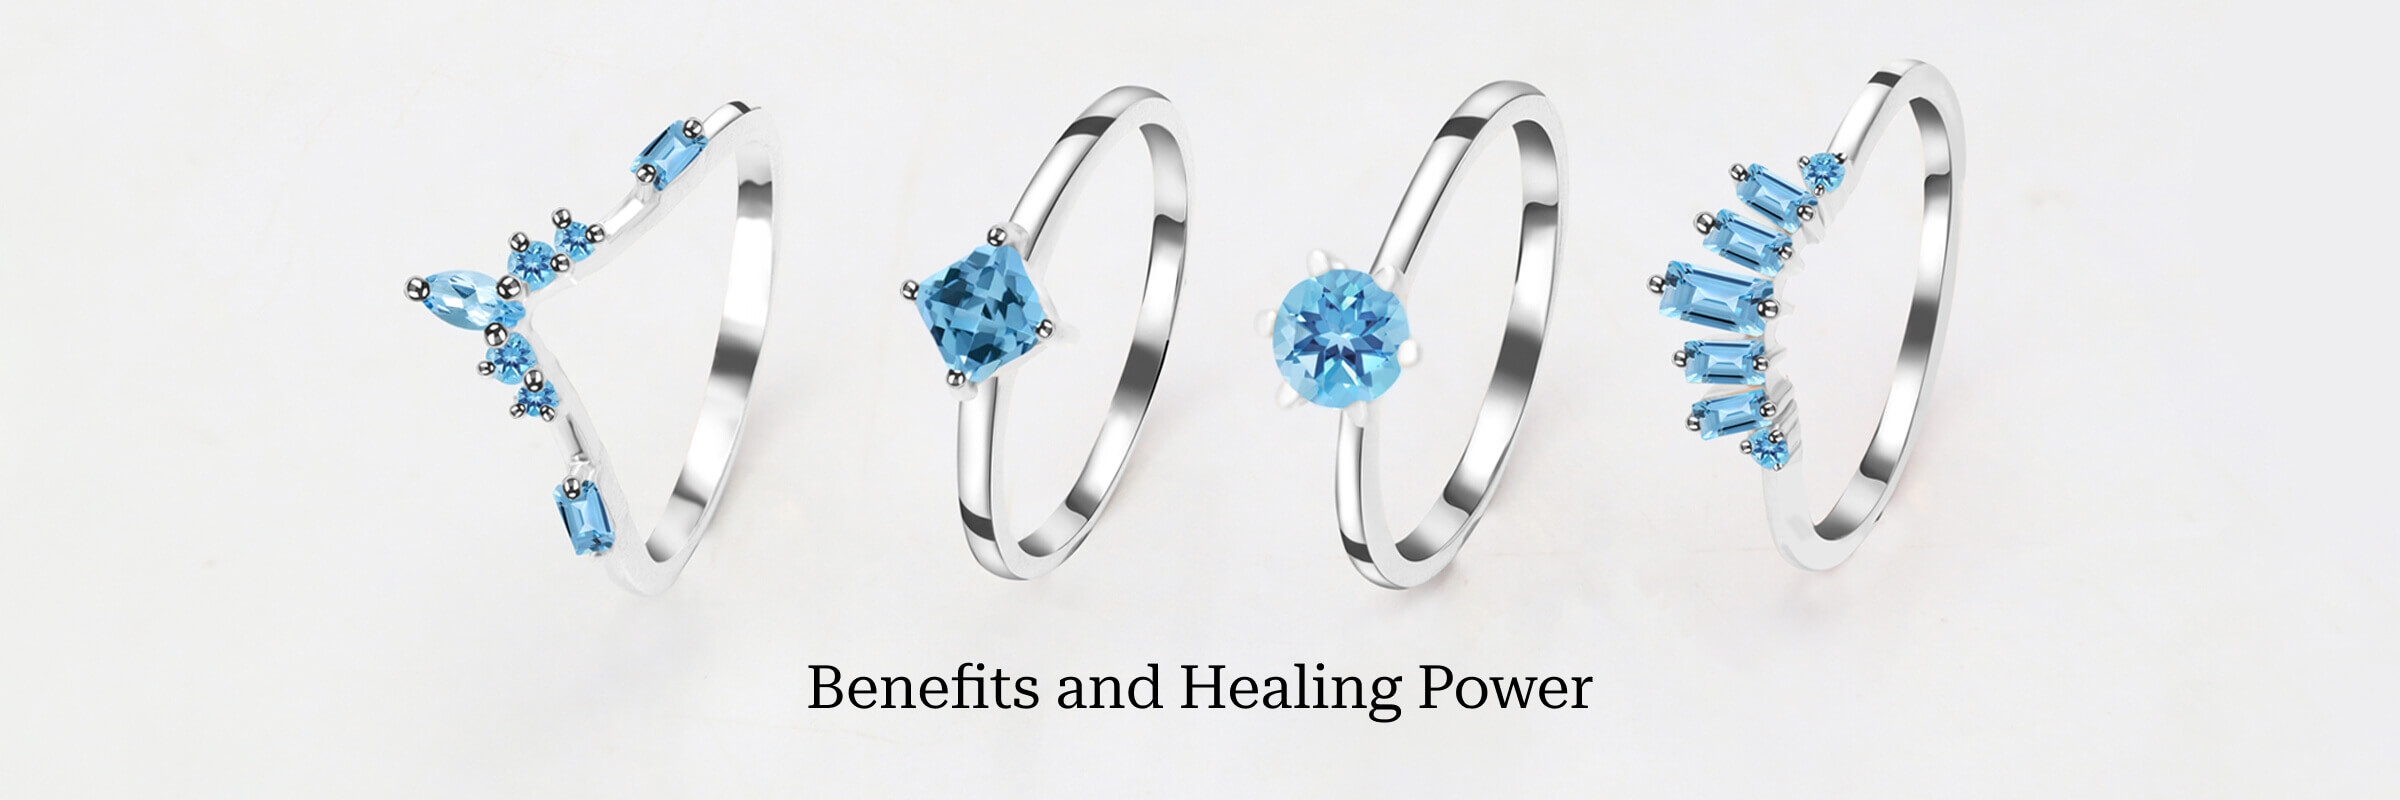 Benefits and healing power of blue topaz